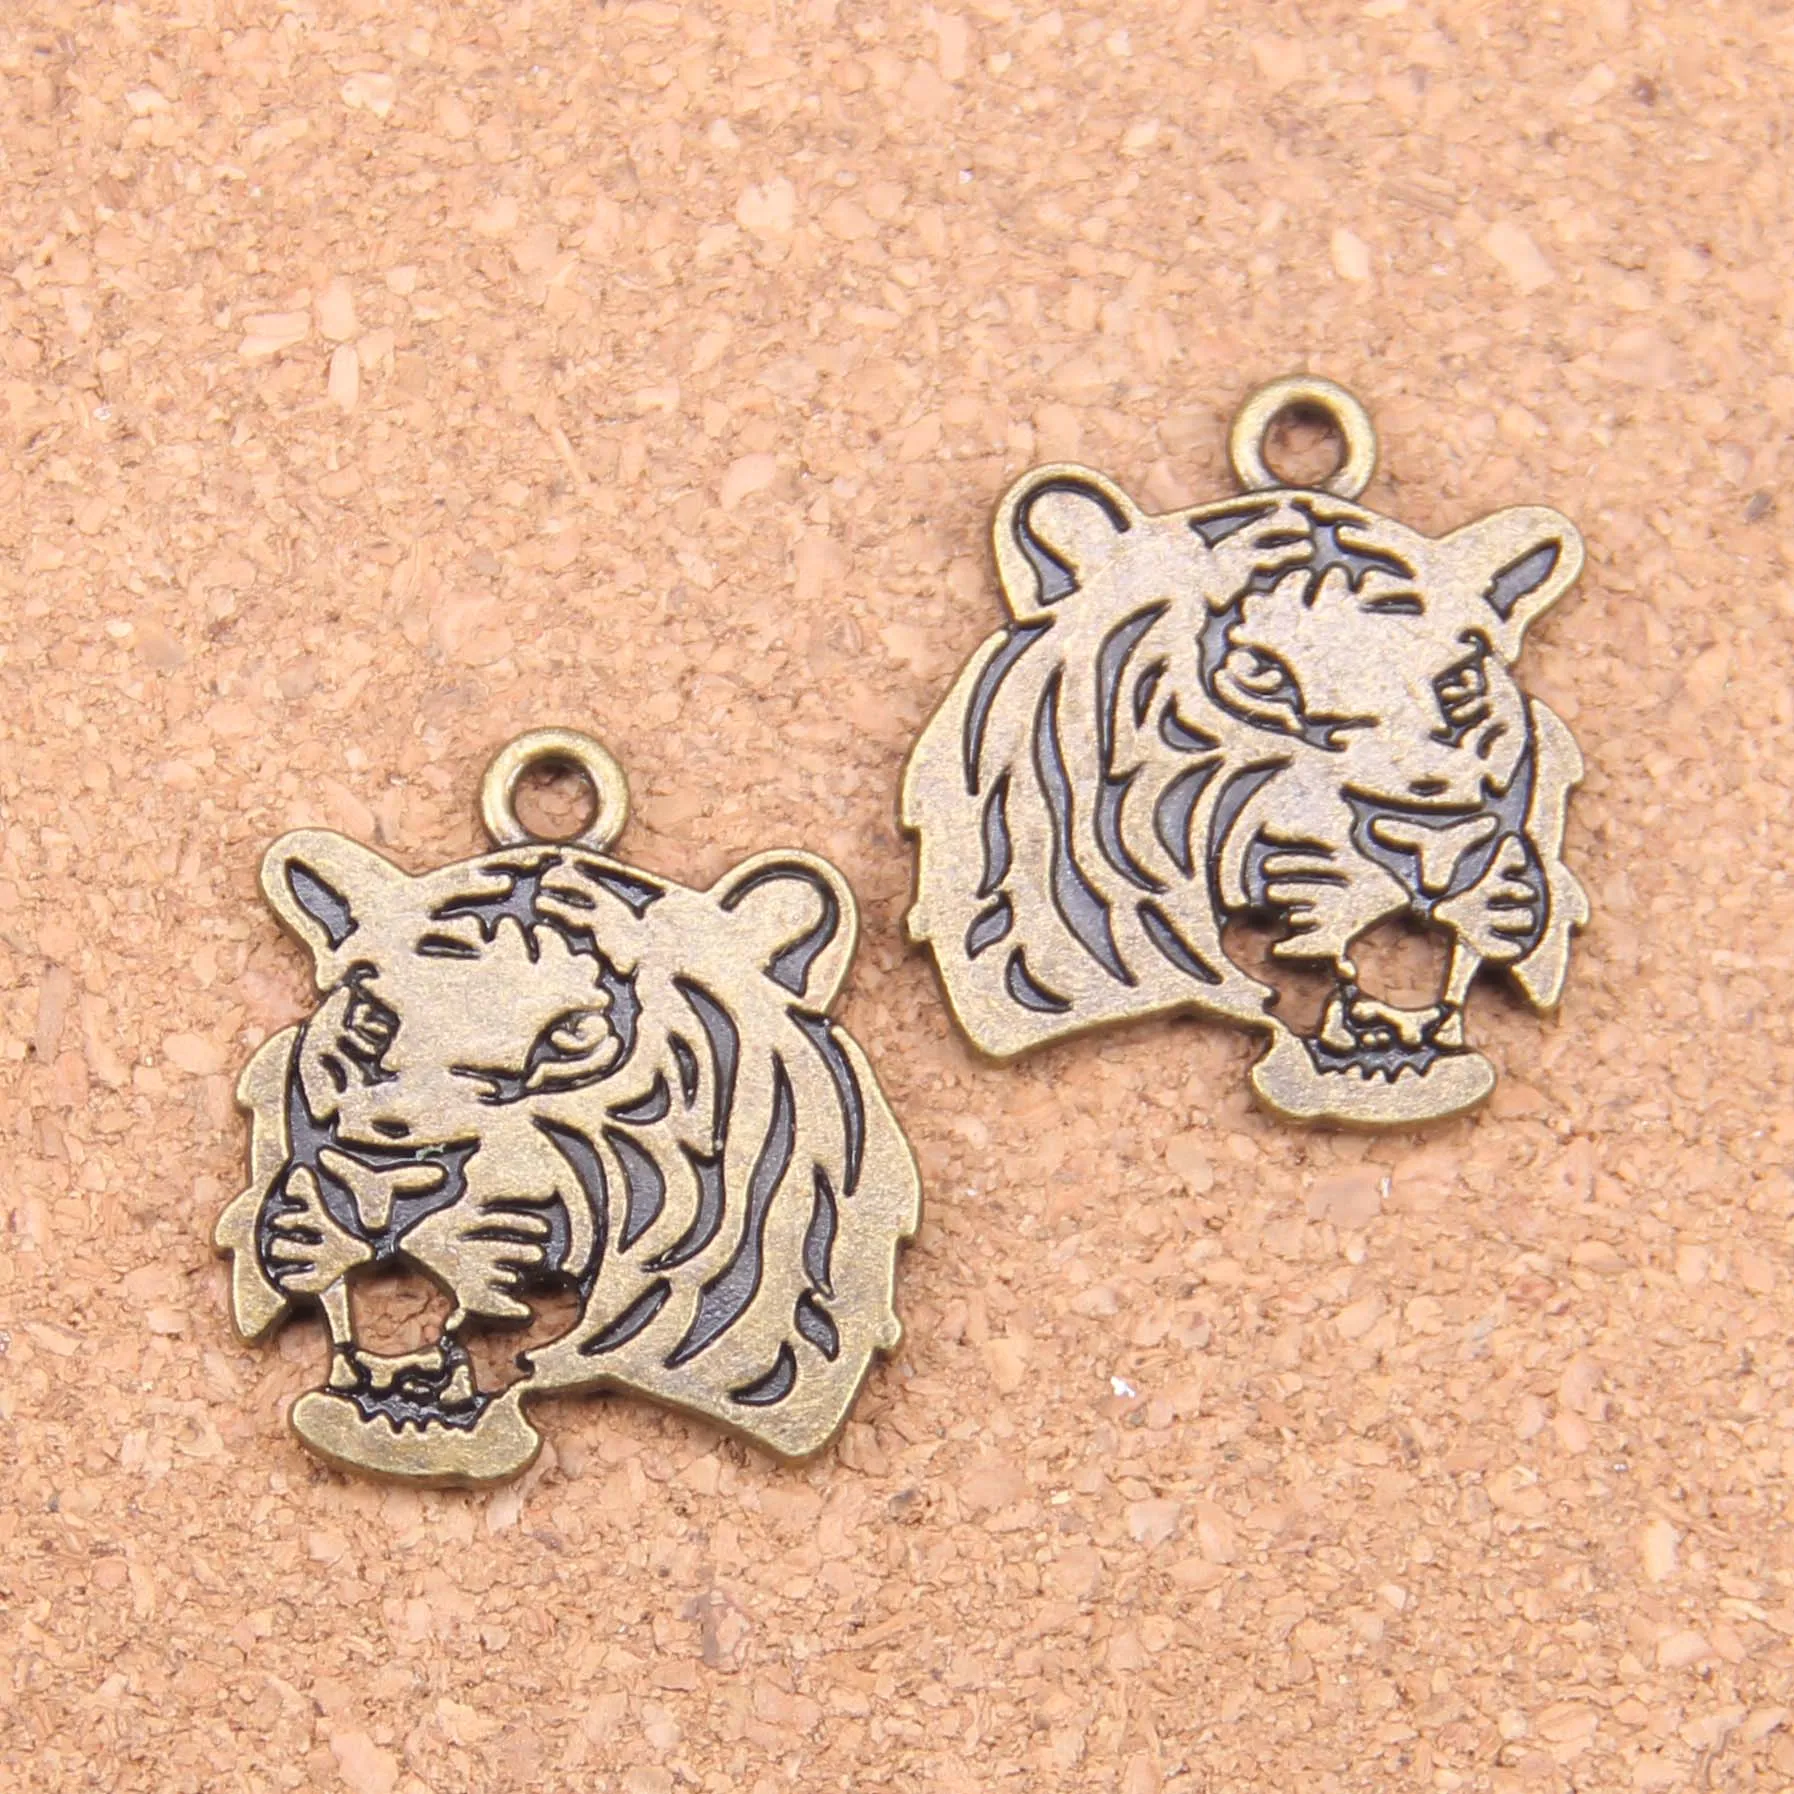 Antique Silver Bronze Plated roaring tiger head Charms Pendant DIY Necklace Bracelet Bangle Findings 27 24mm257P